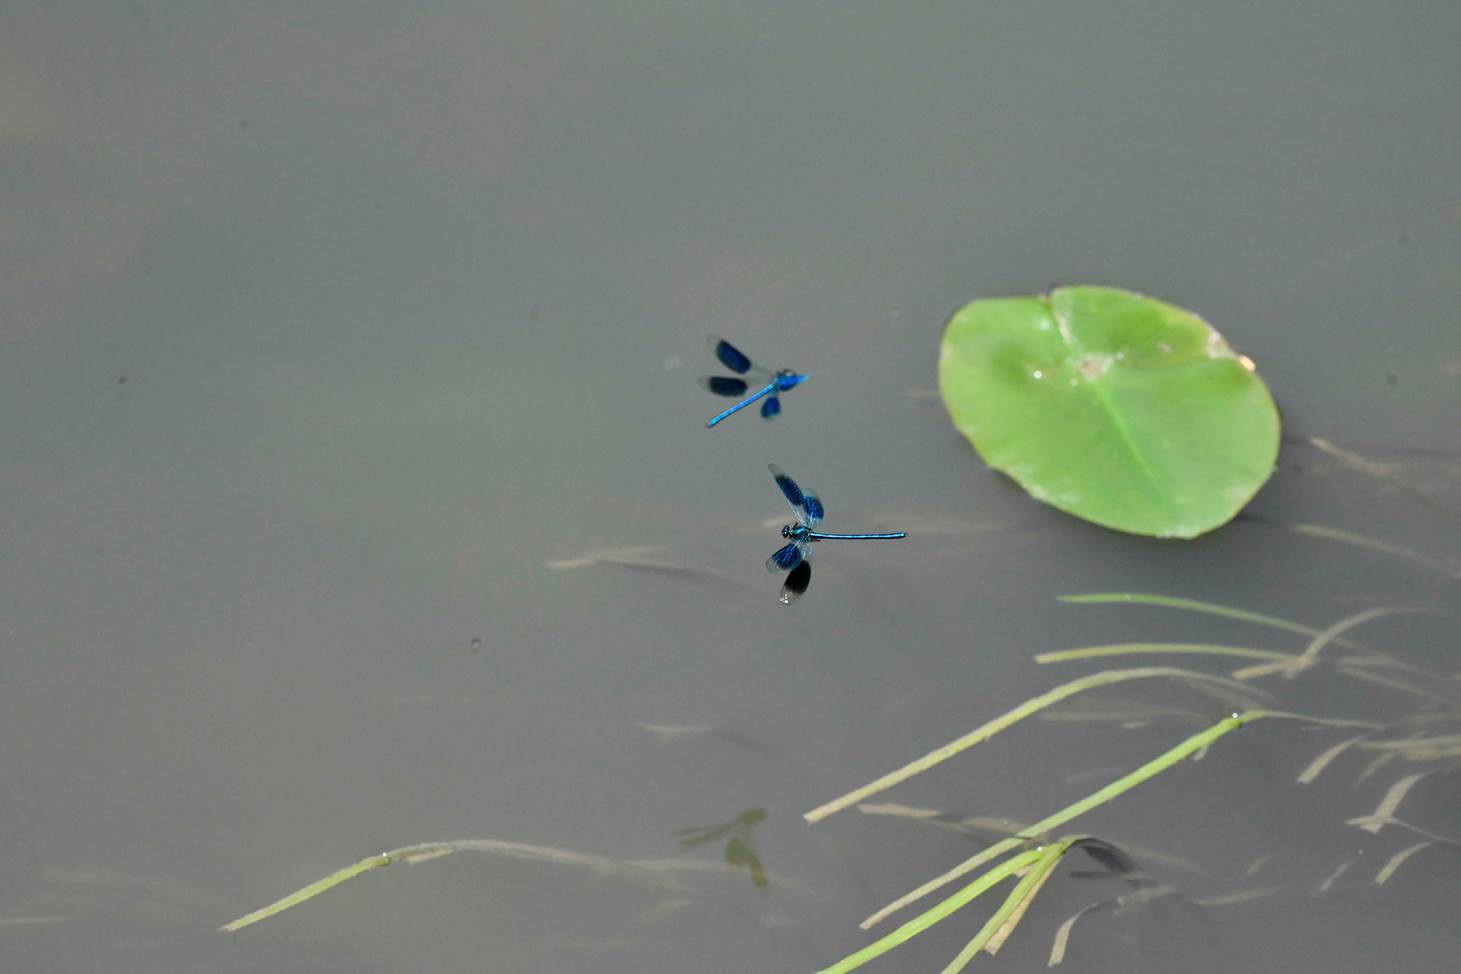 A few dragonflies floating on water

Description automatically generated